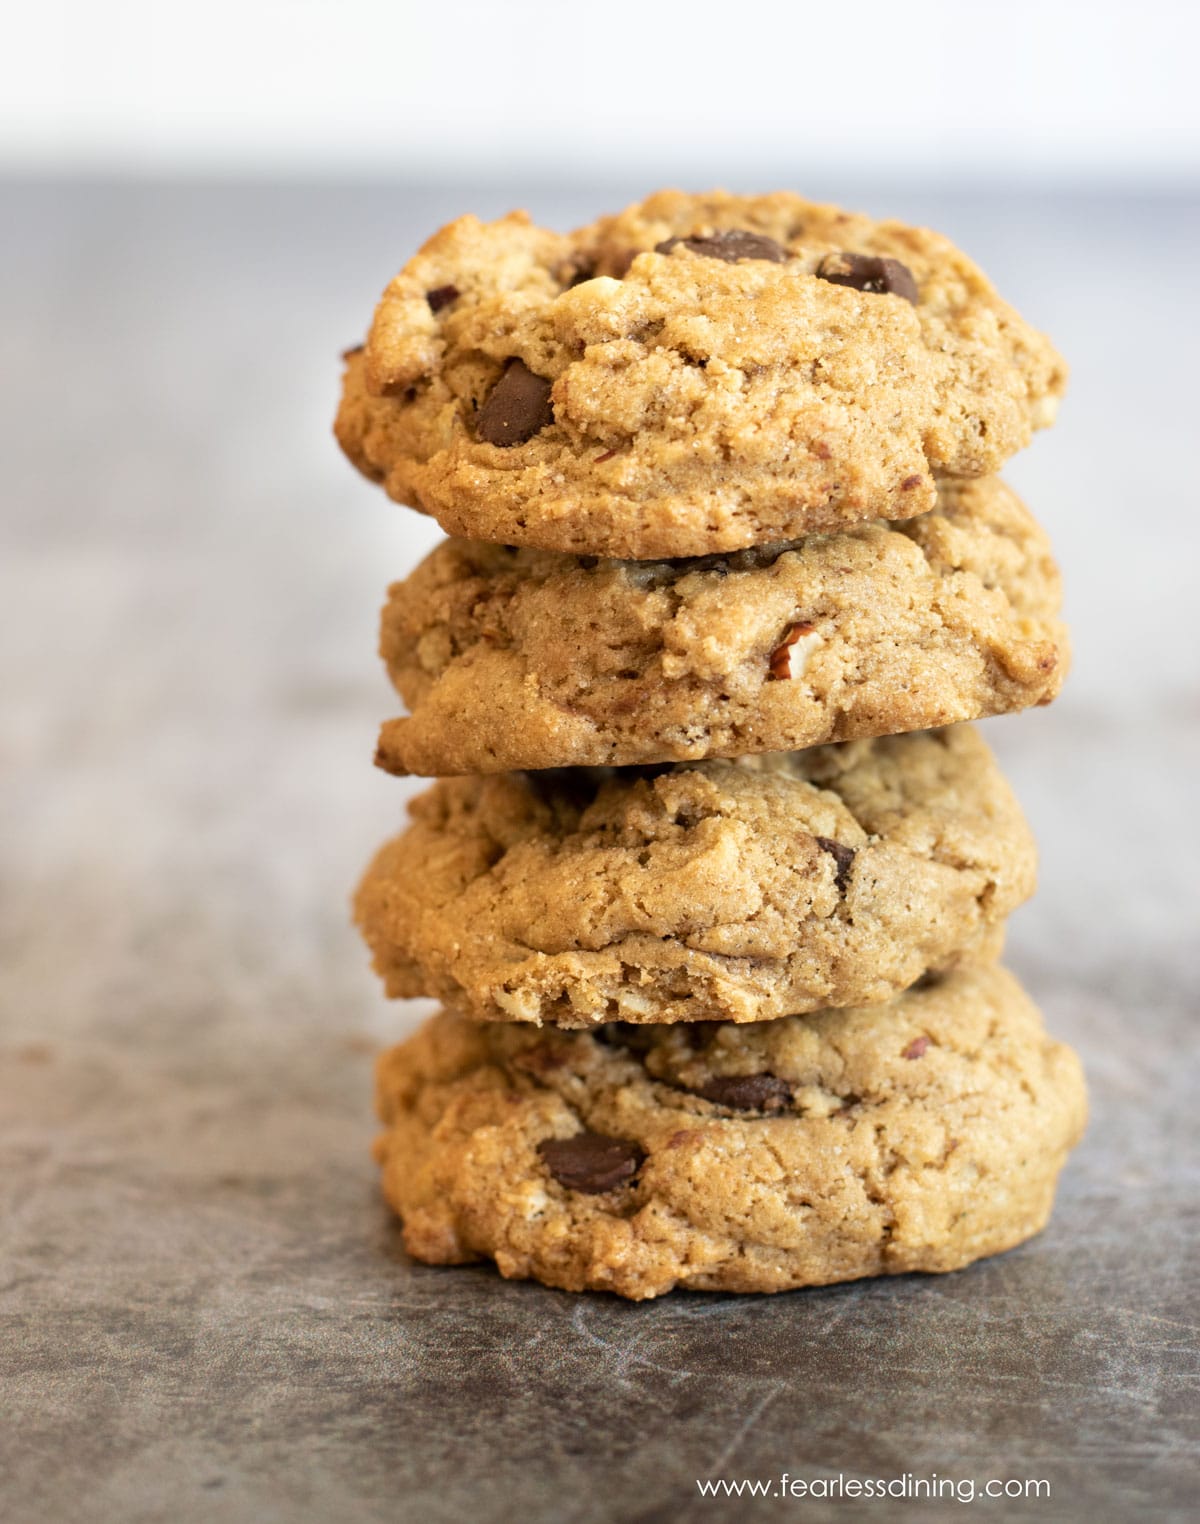 A stack of four chocolate chip hazelnut cookies.